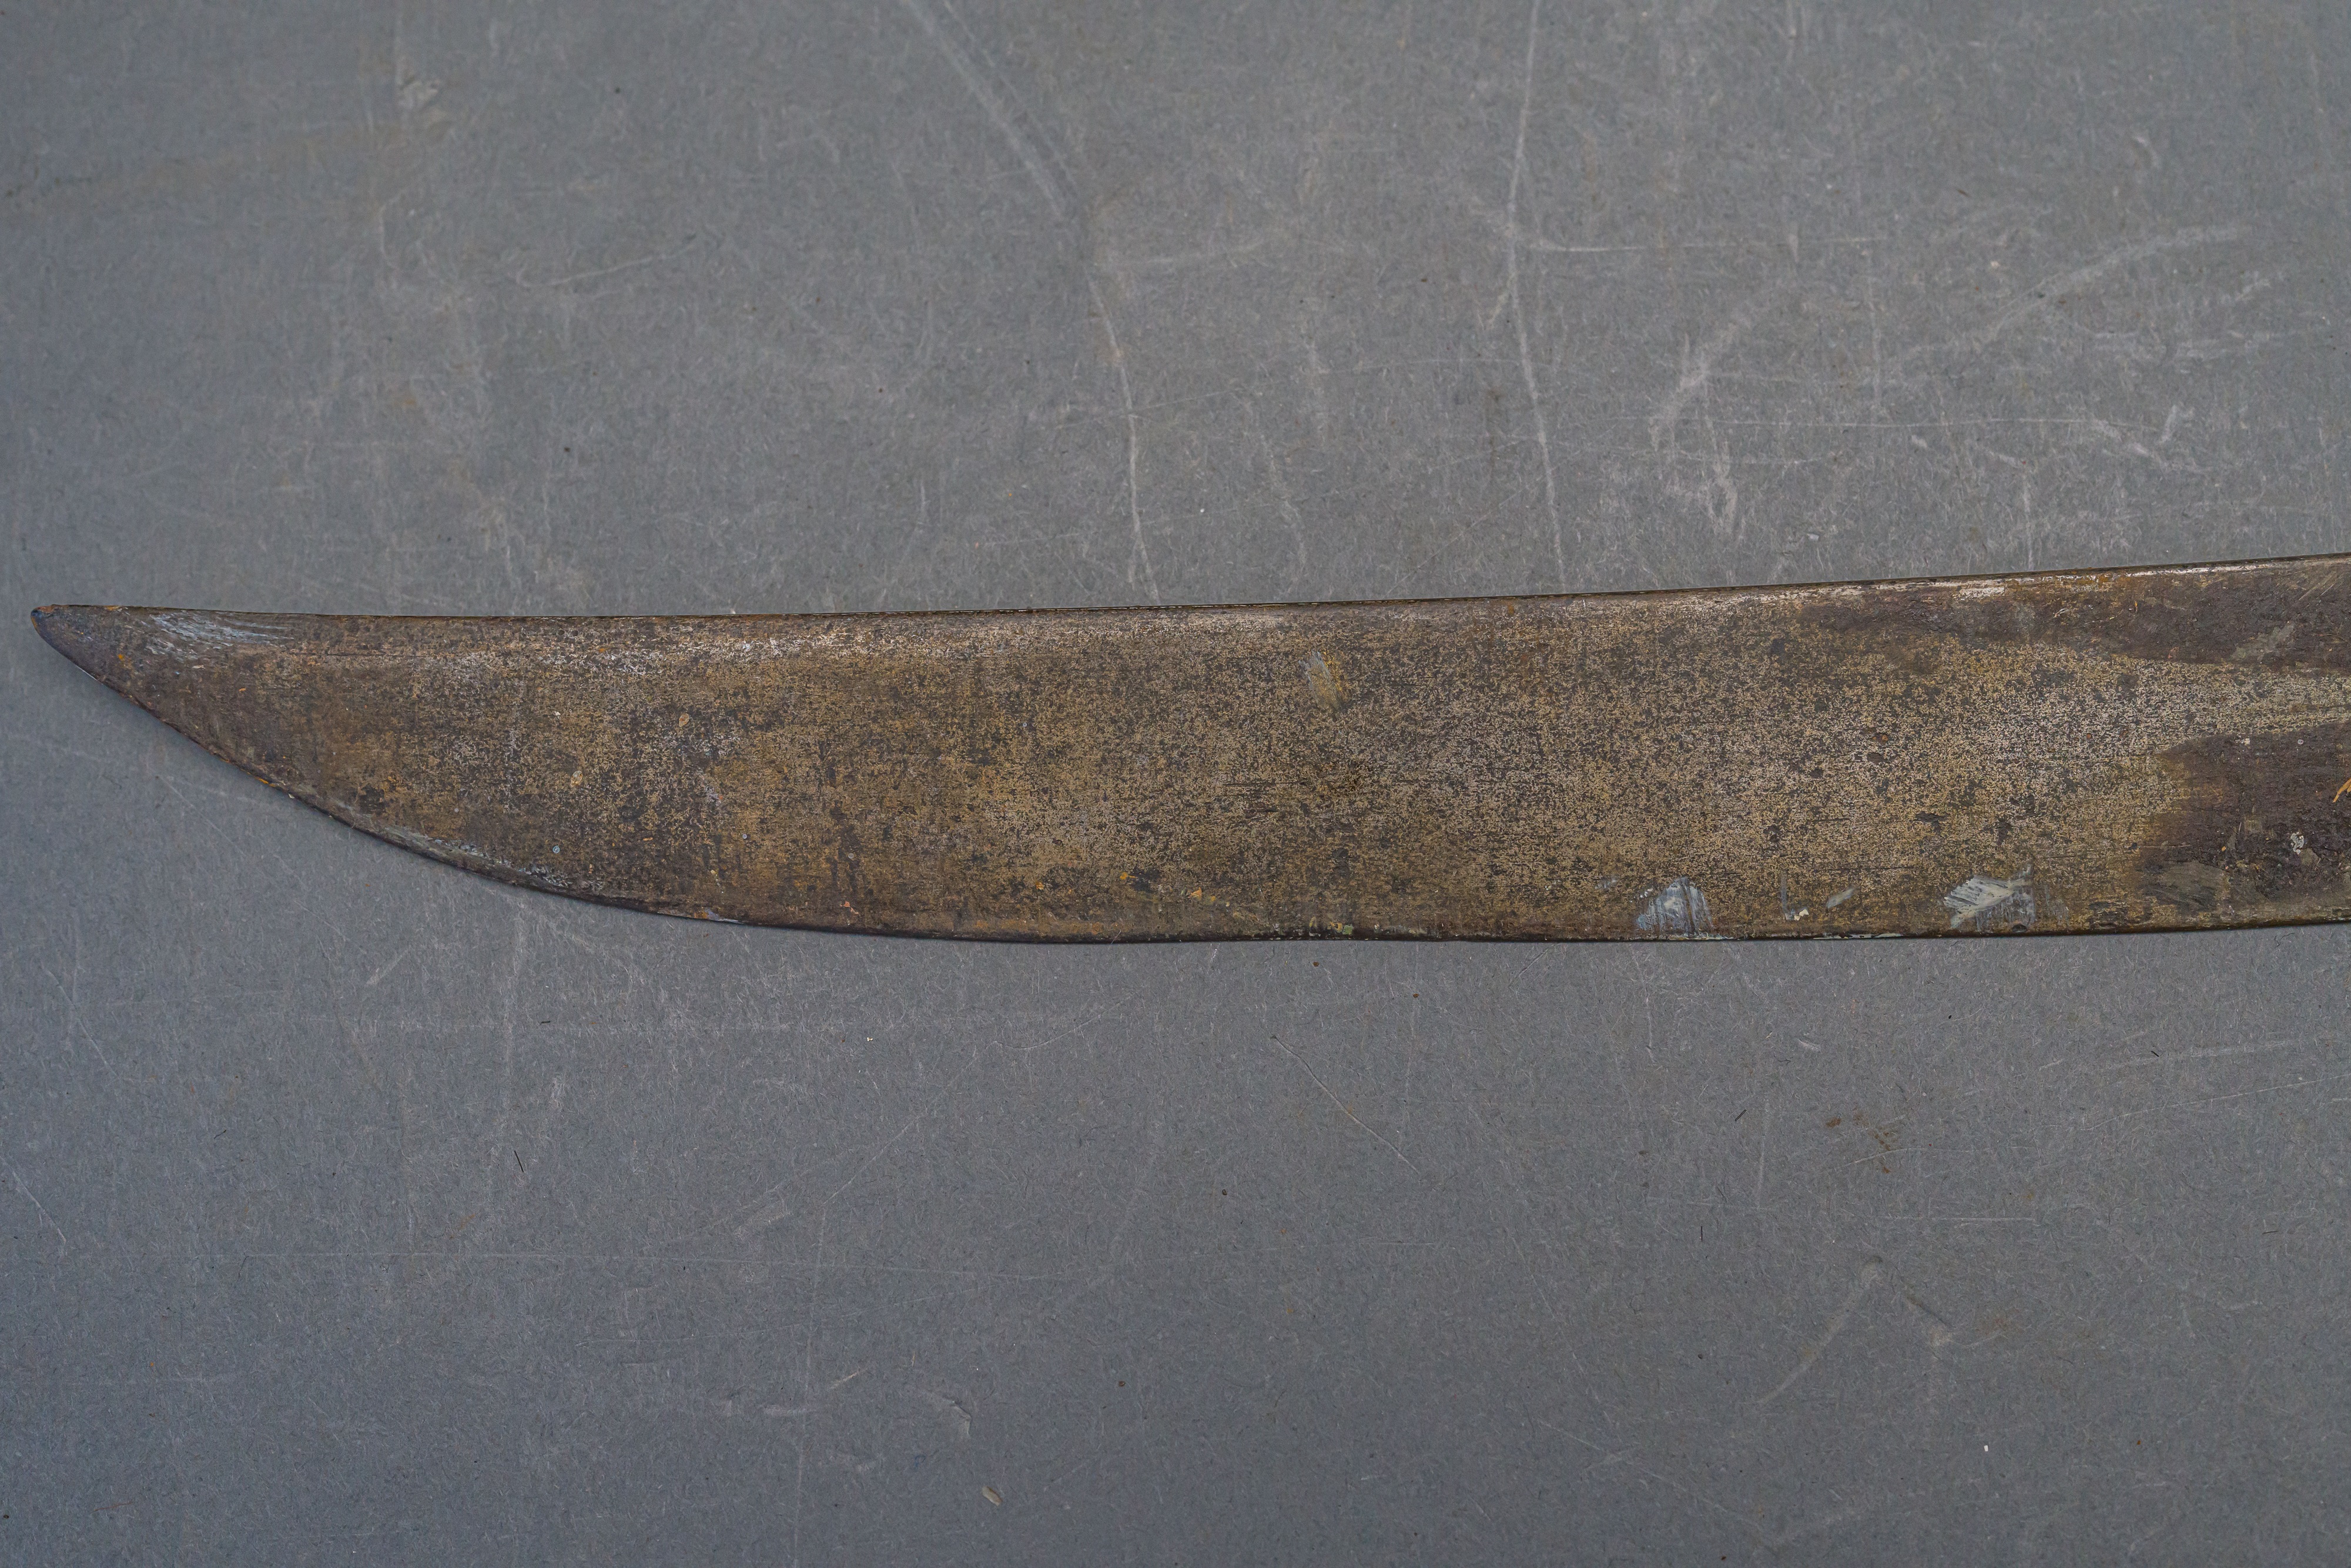 TWO AFRICAN AXES, A BOOMERANG AND A FRENCH MODEL 1816 INFANTRY SHORTSWORD (BRIQUET) - Image 9 of 23